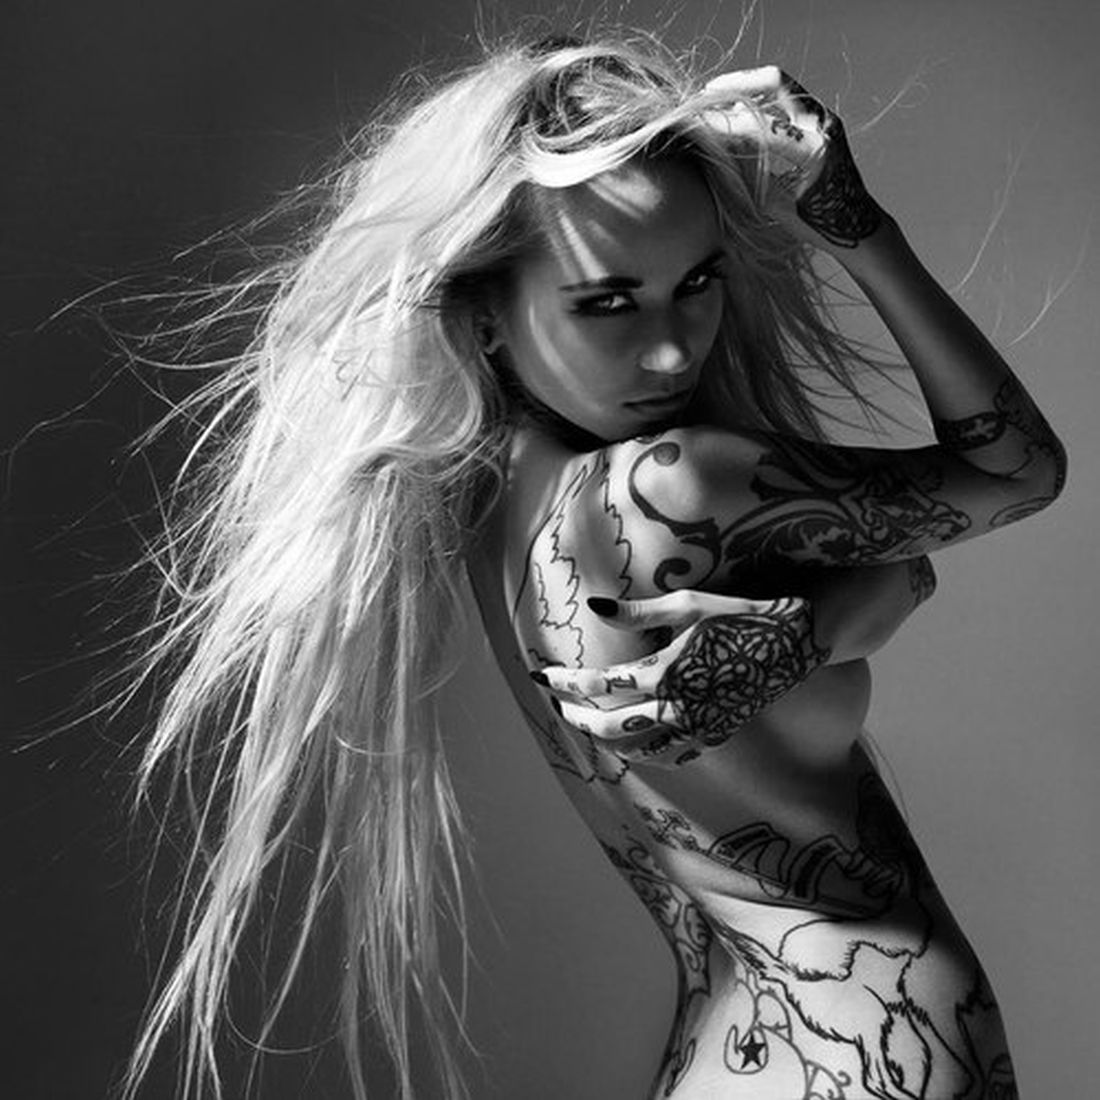 Naked Sara Fabel. Added 07/19/2016 by Gwen Ariano < ANCENSORED